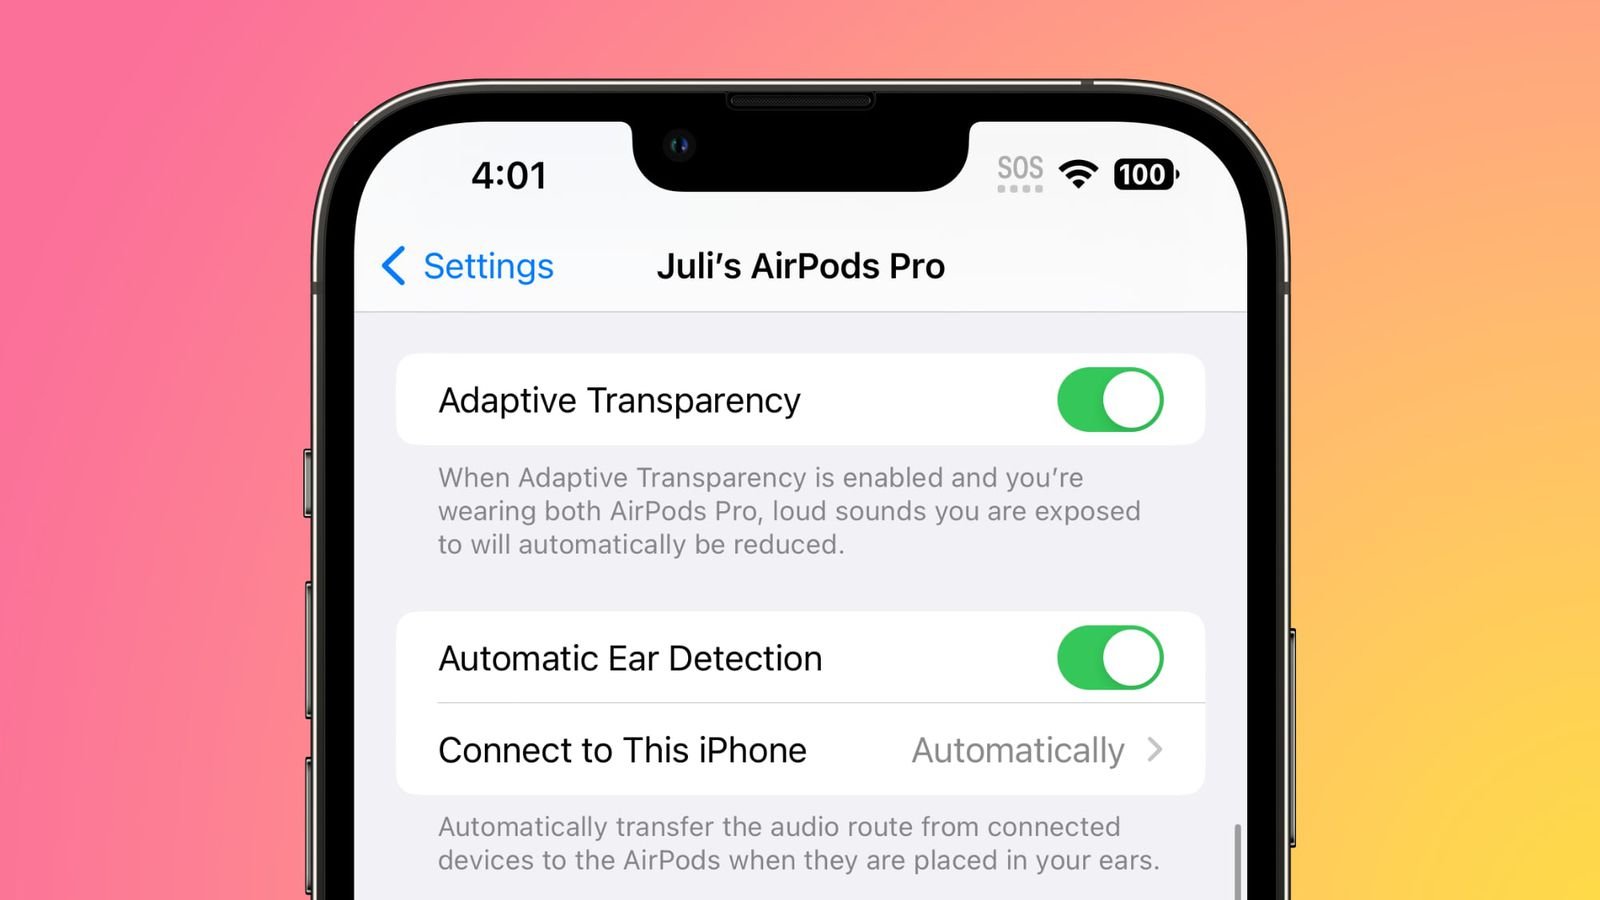 adaptive-transparency-airpods-pro